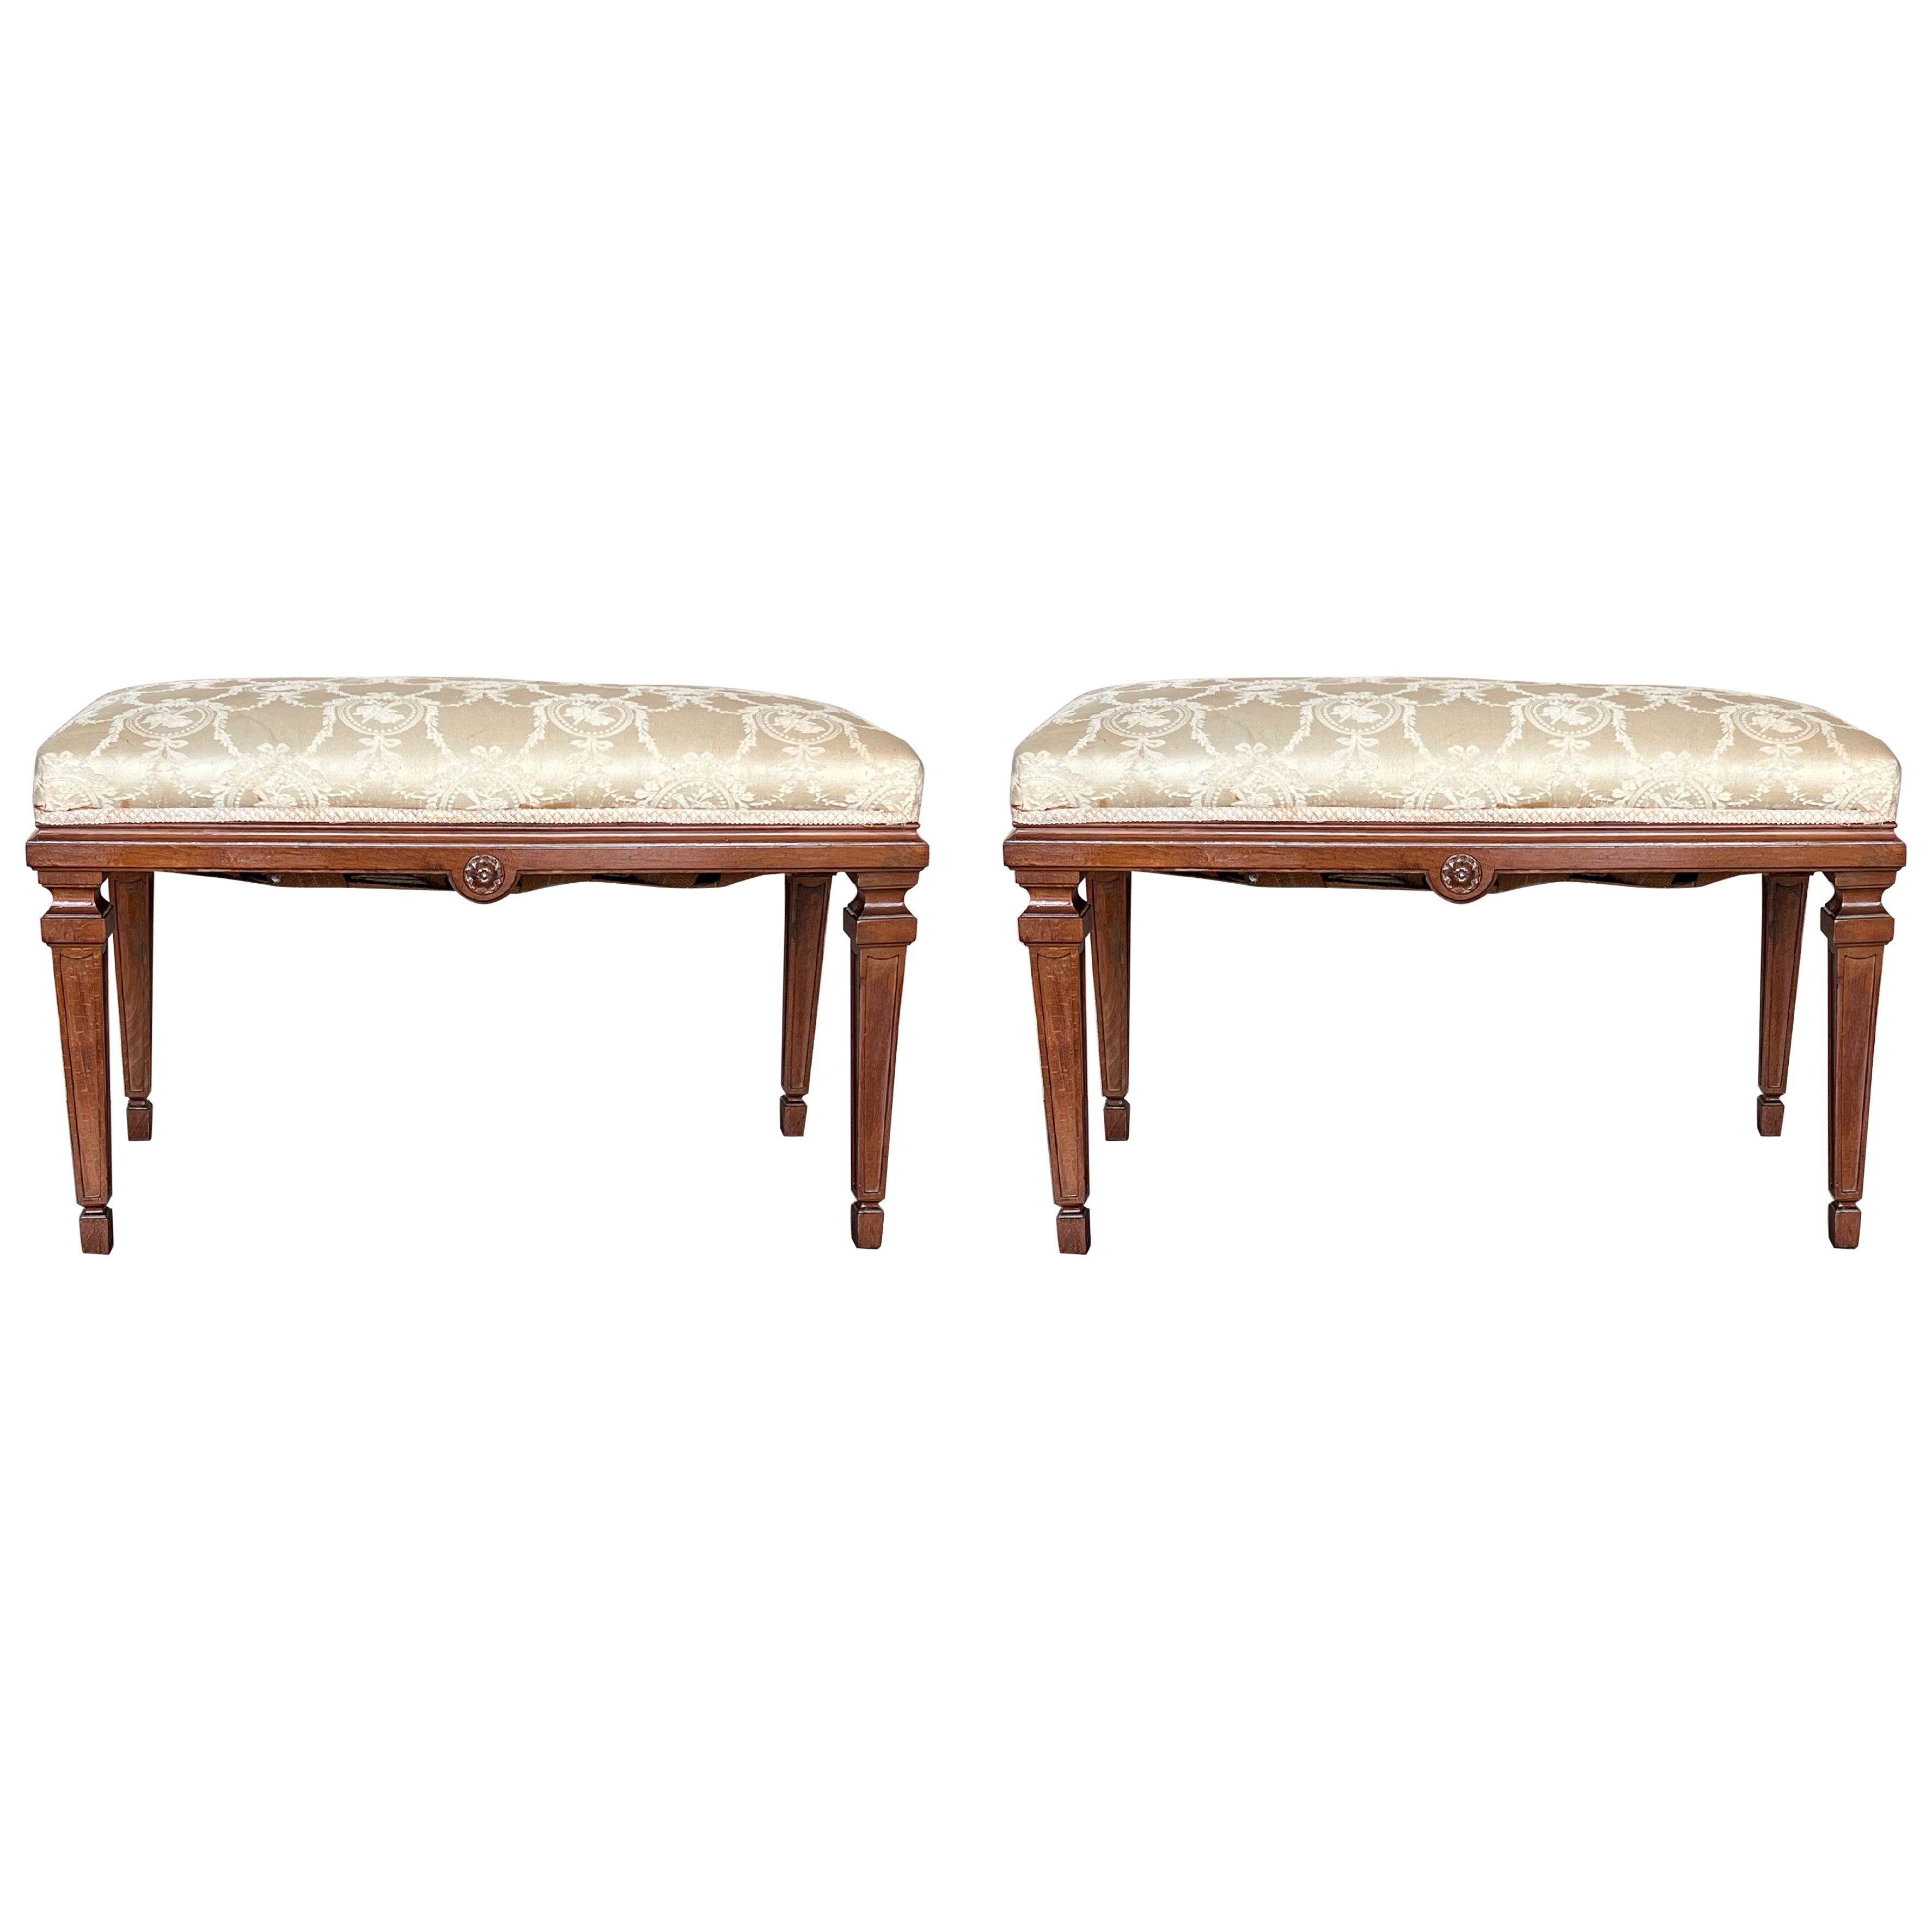 Neoclassical Style French Walnut Benches with Carved Legs, a Pair